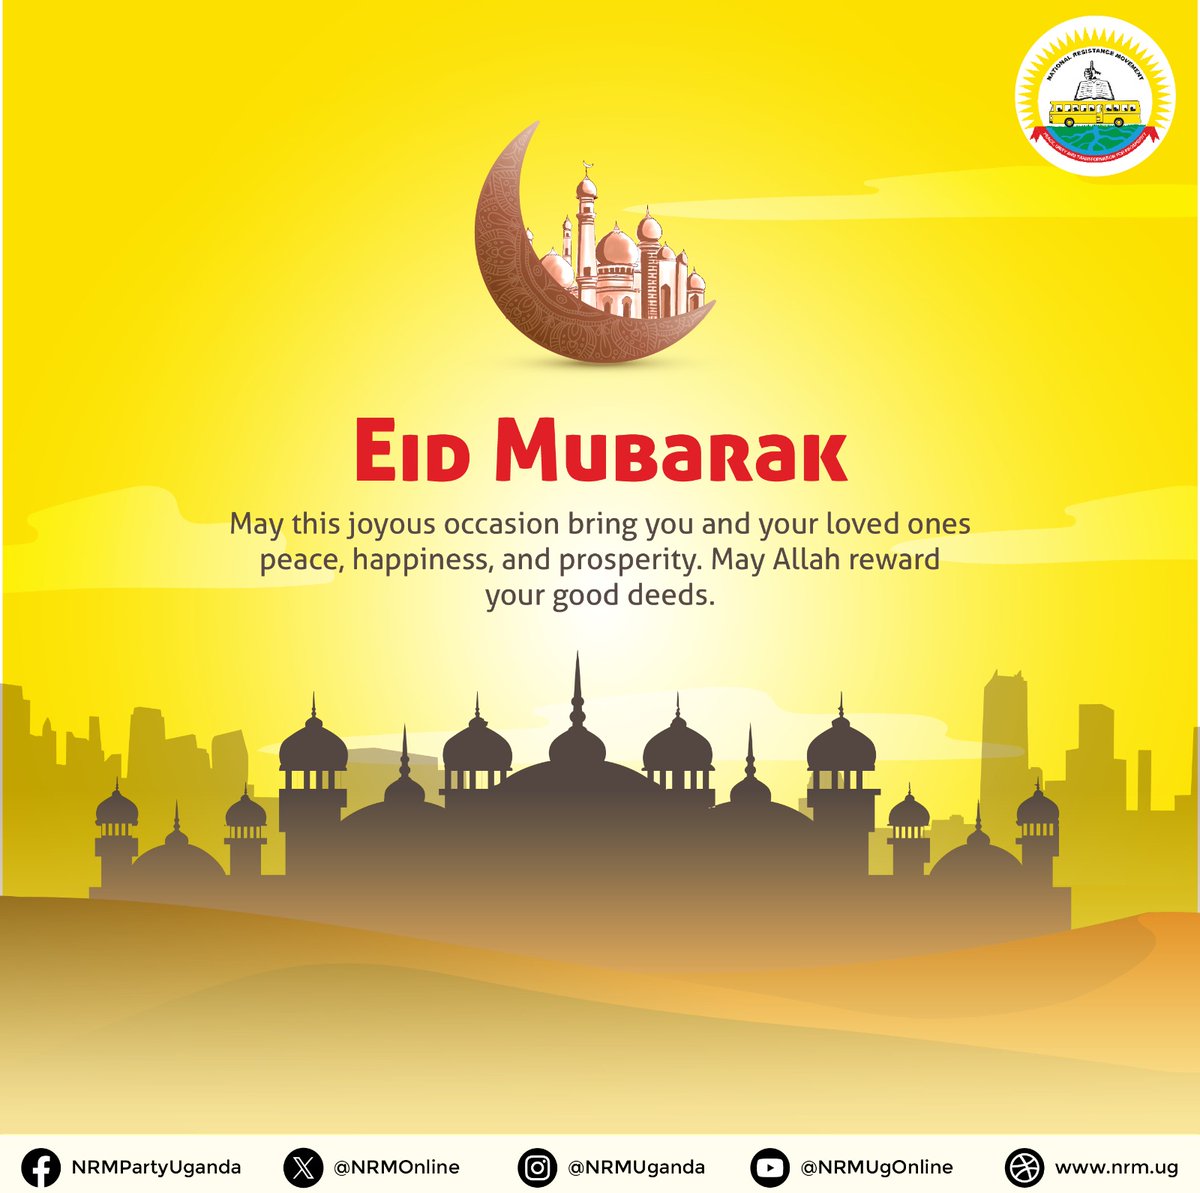 'Oh ye who are believers, fasting is prescribed to you, as it was prescribed to your predecessors, so that you may be God-fearing!' Eid Mubarak to you all.